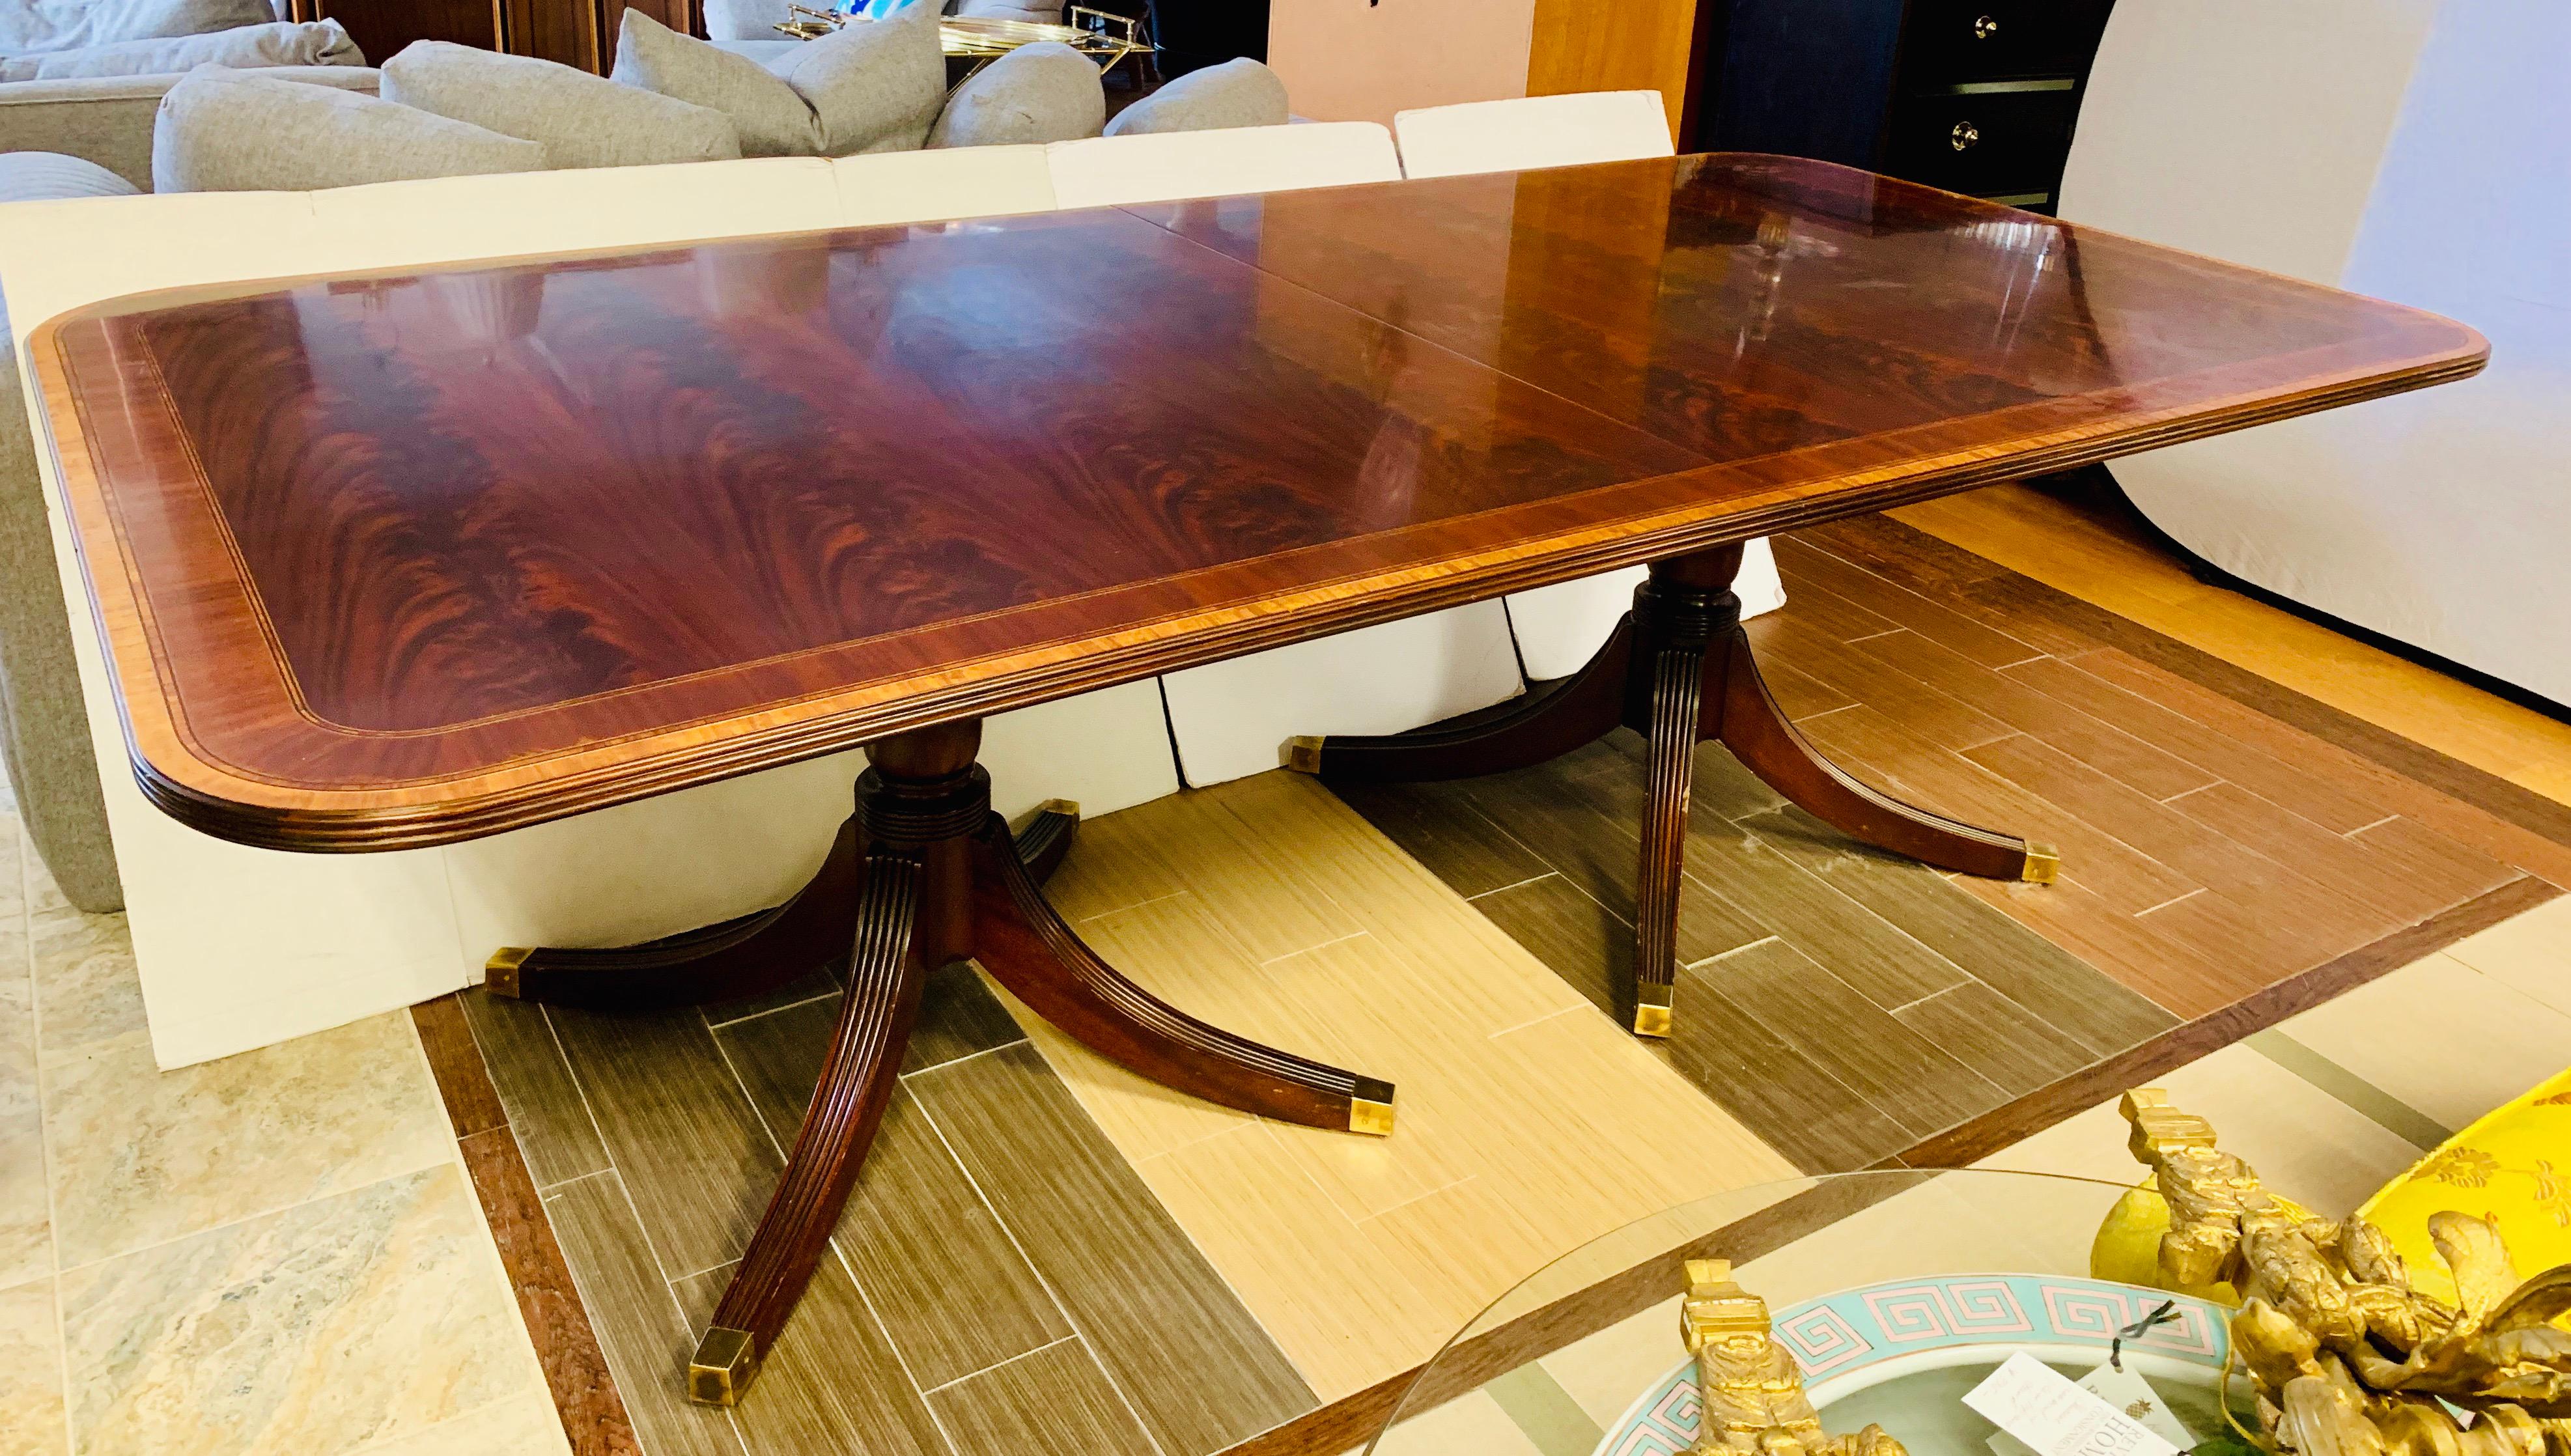 Stunning high-end book-matched flame mahogany double pedestal dining table with satinwood banded inlay. The table edge has a three beaded profile, and the pedestals have four splayed feet with solid brass casters and toe caps. Comes with two leaves